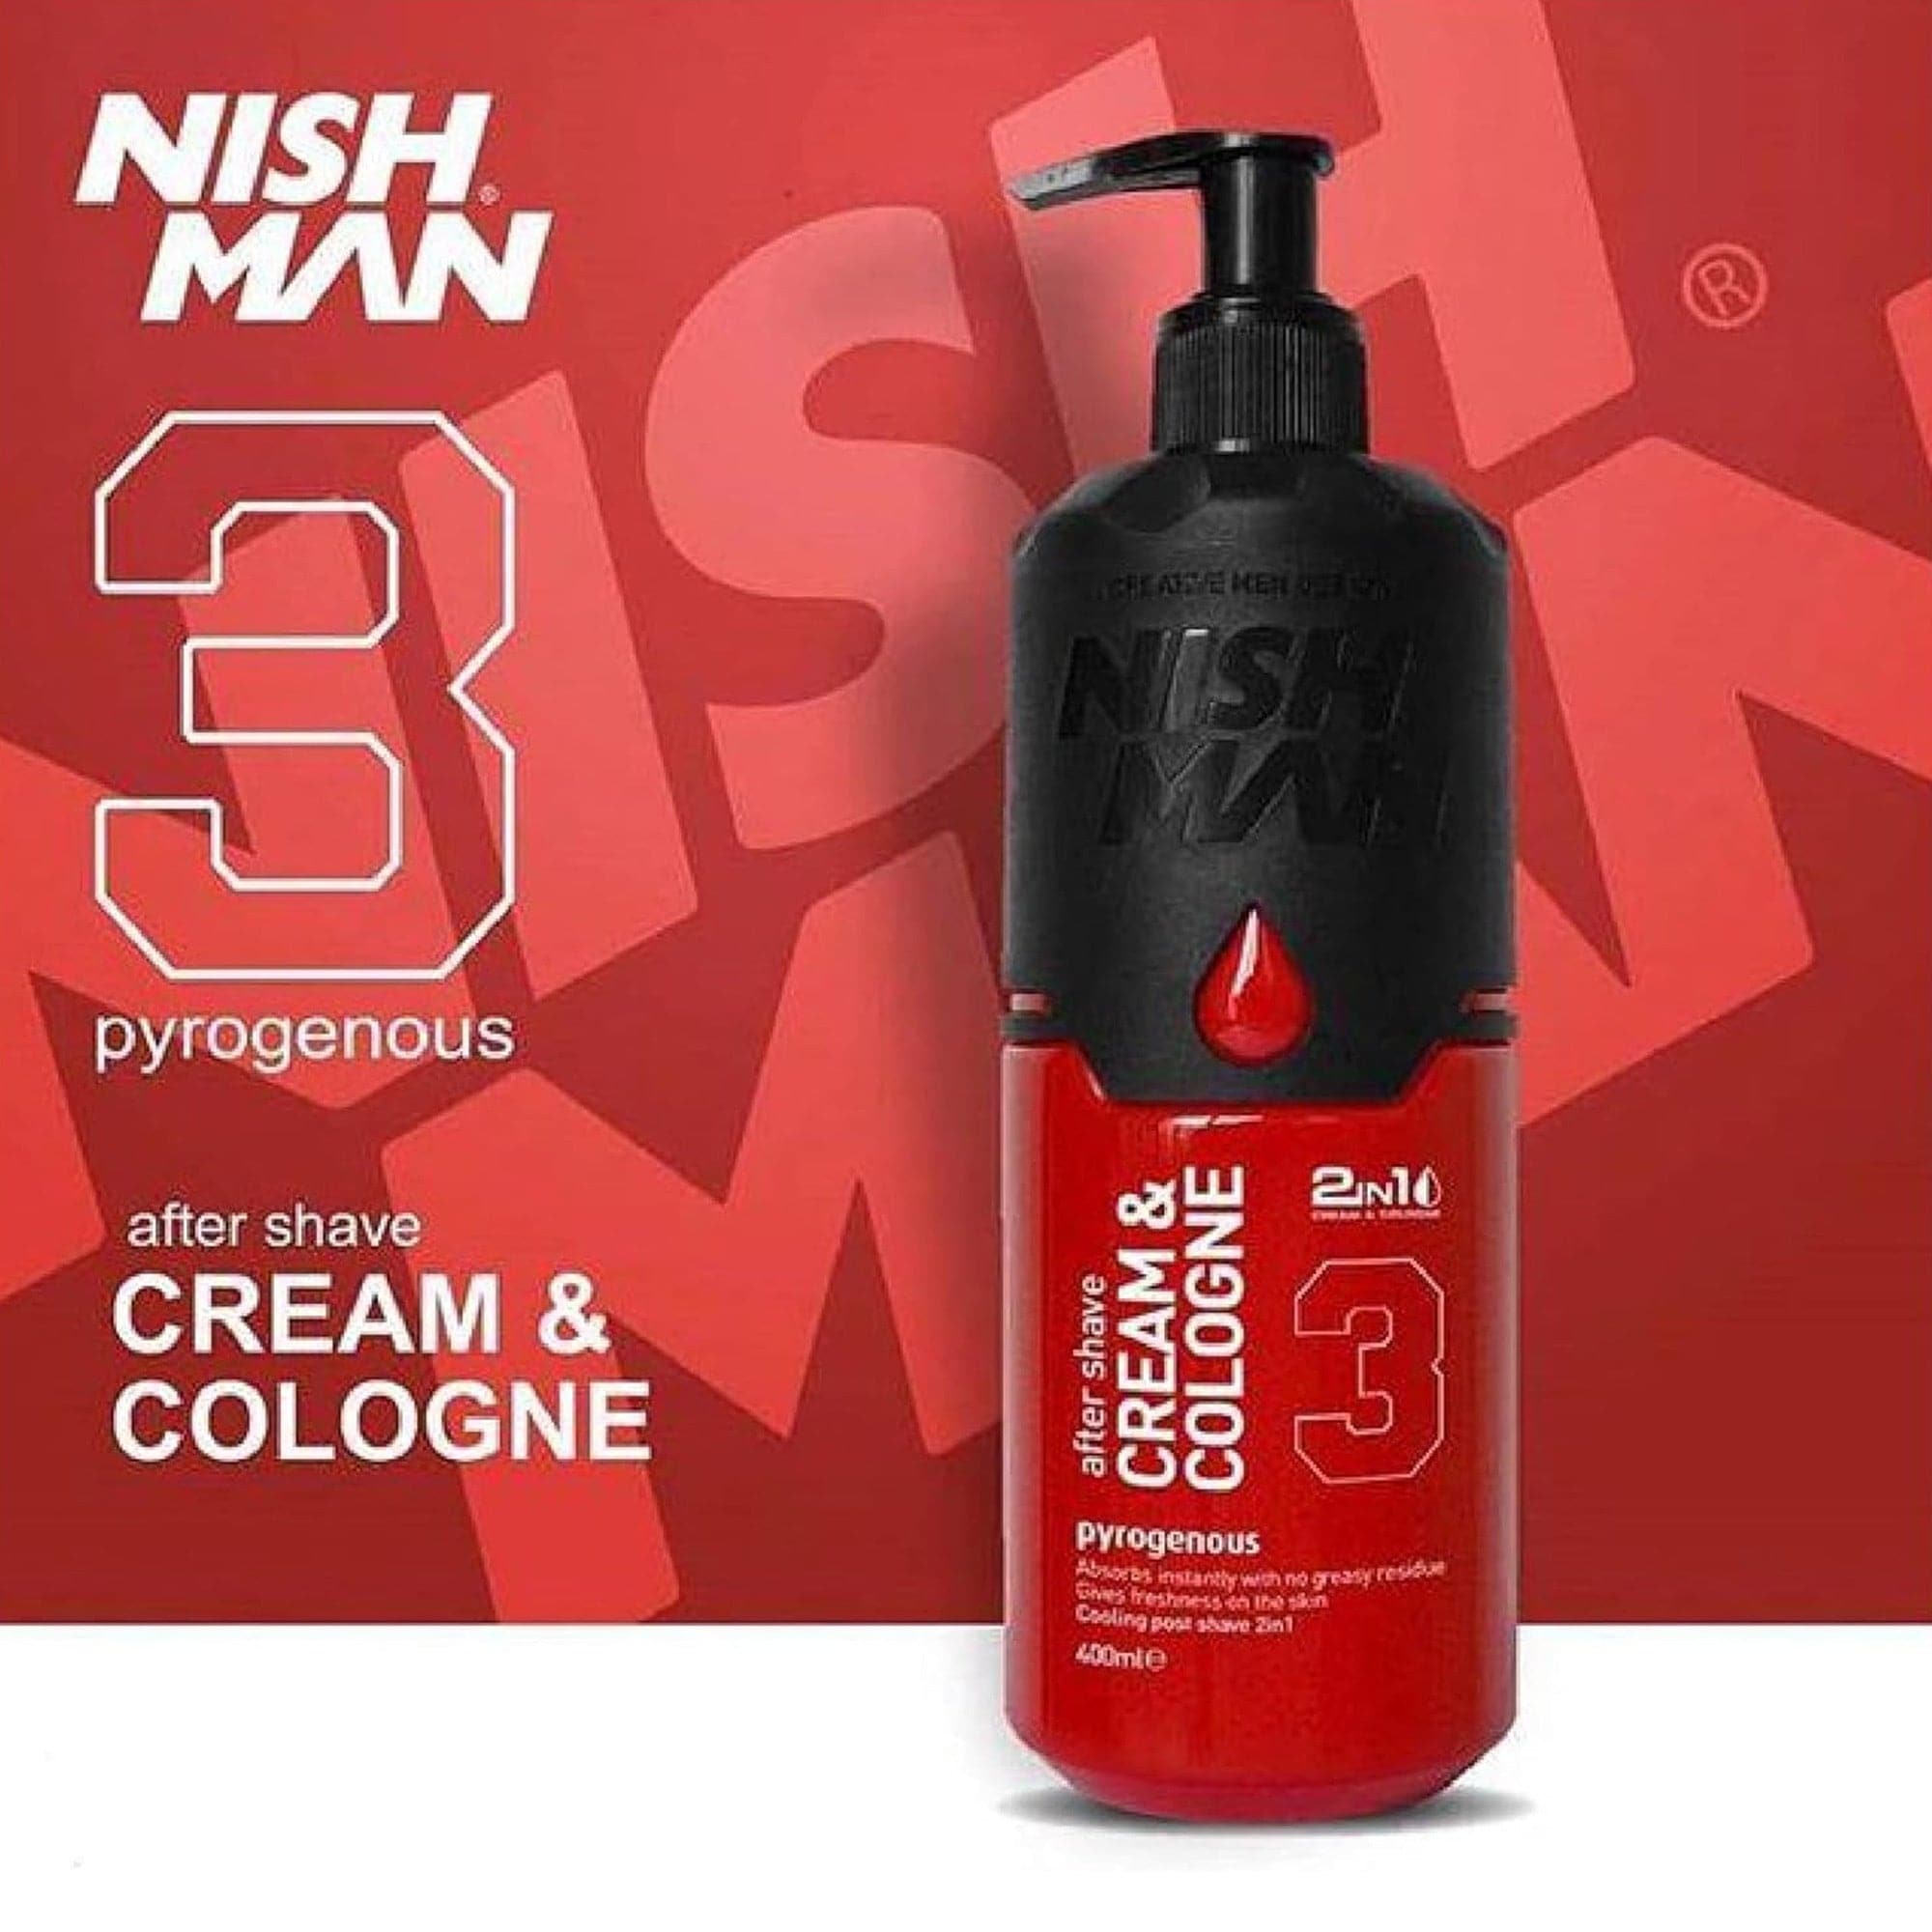 Nishman - After Shave Cream & Cologne 2in1 No.3 Pyrogenous 400ml